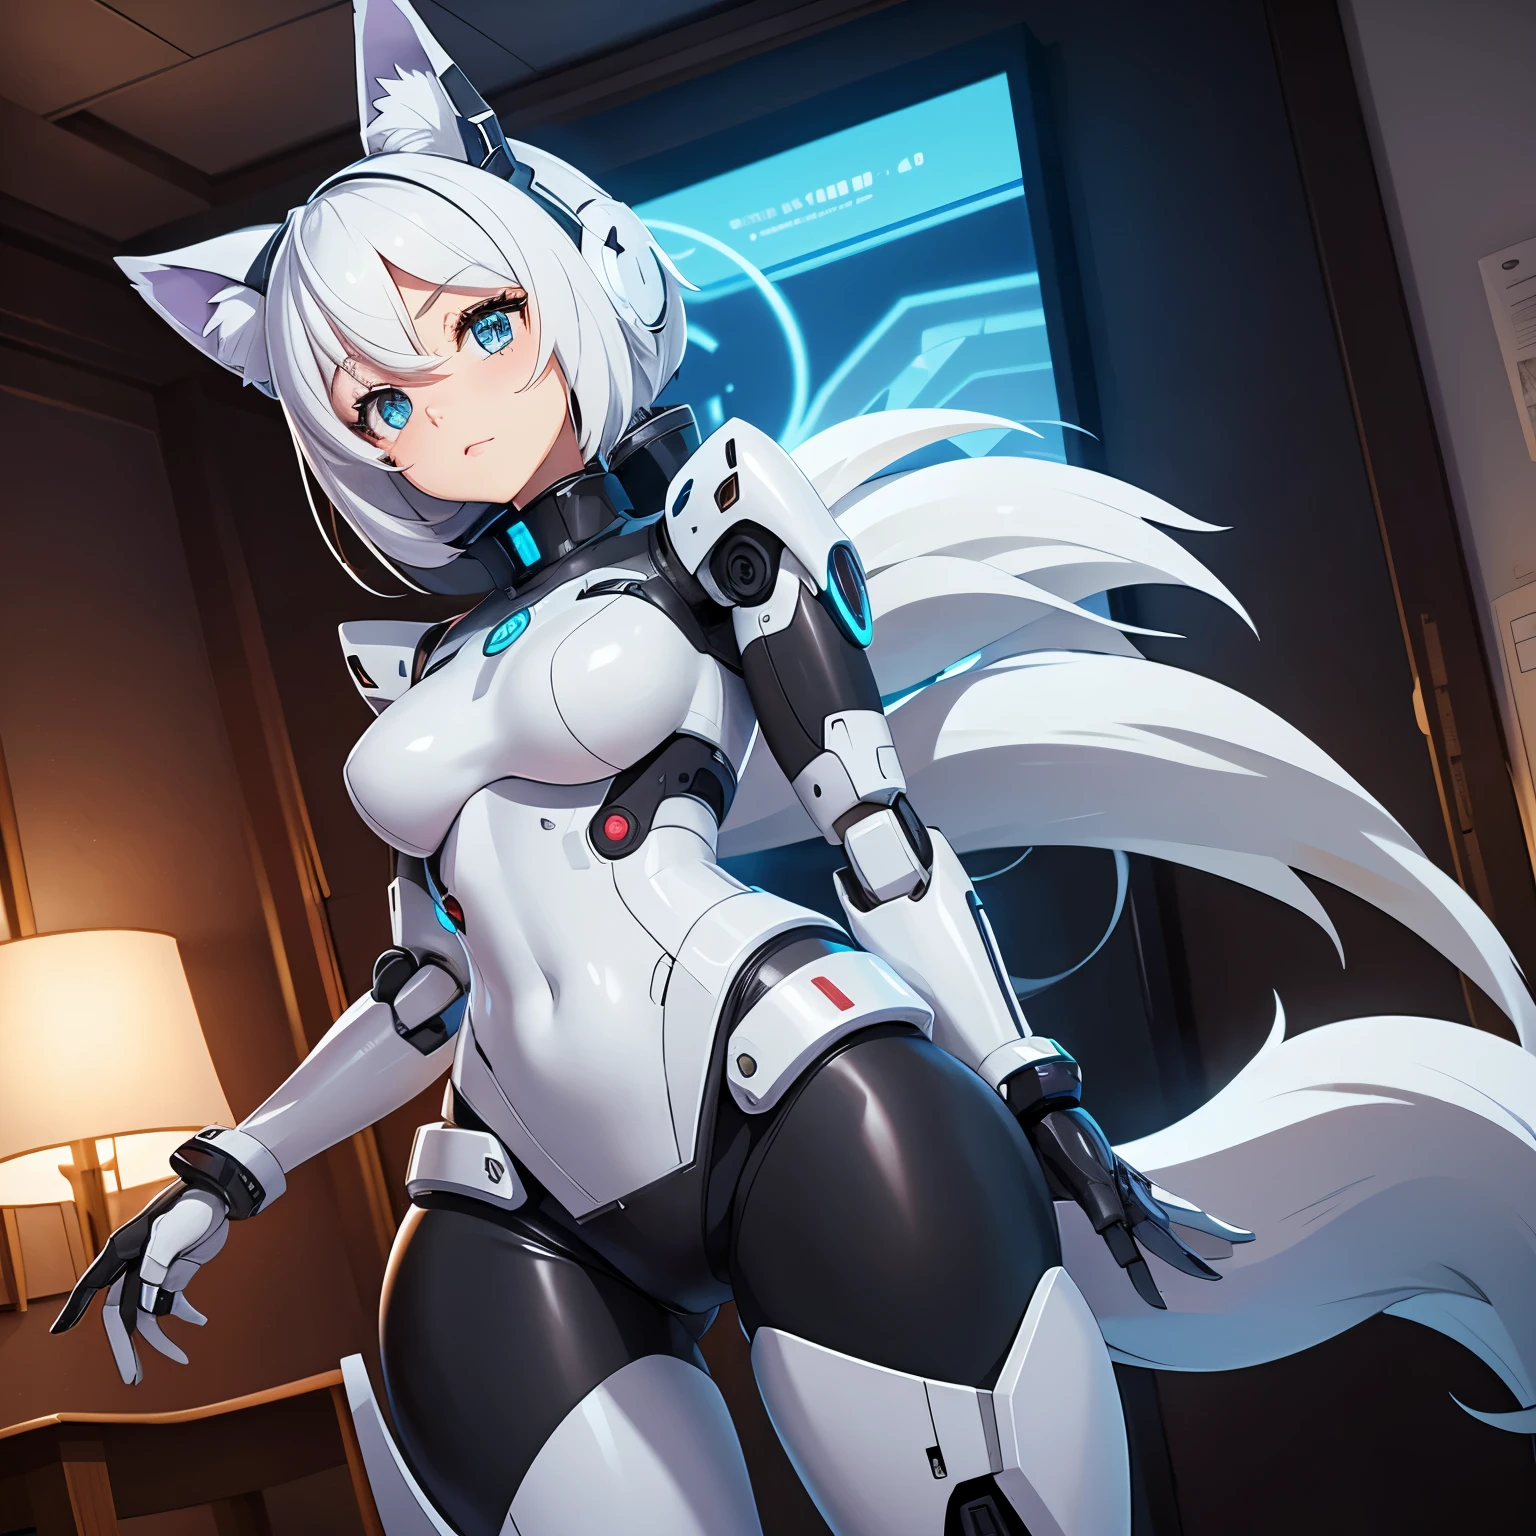 Anime style image of an Android robot girl who has a robotic body, is in underwear and has wolf ears and a tail who is in a room 